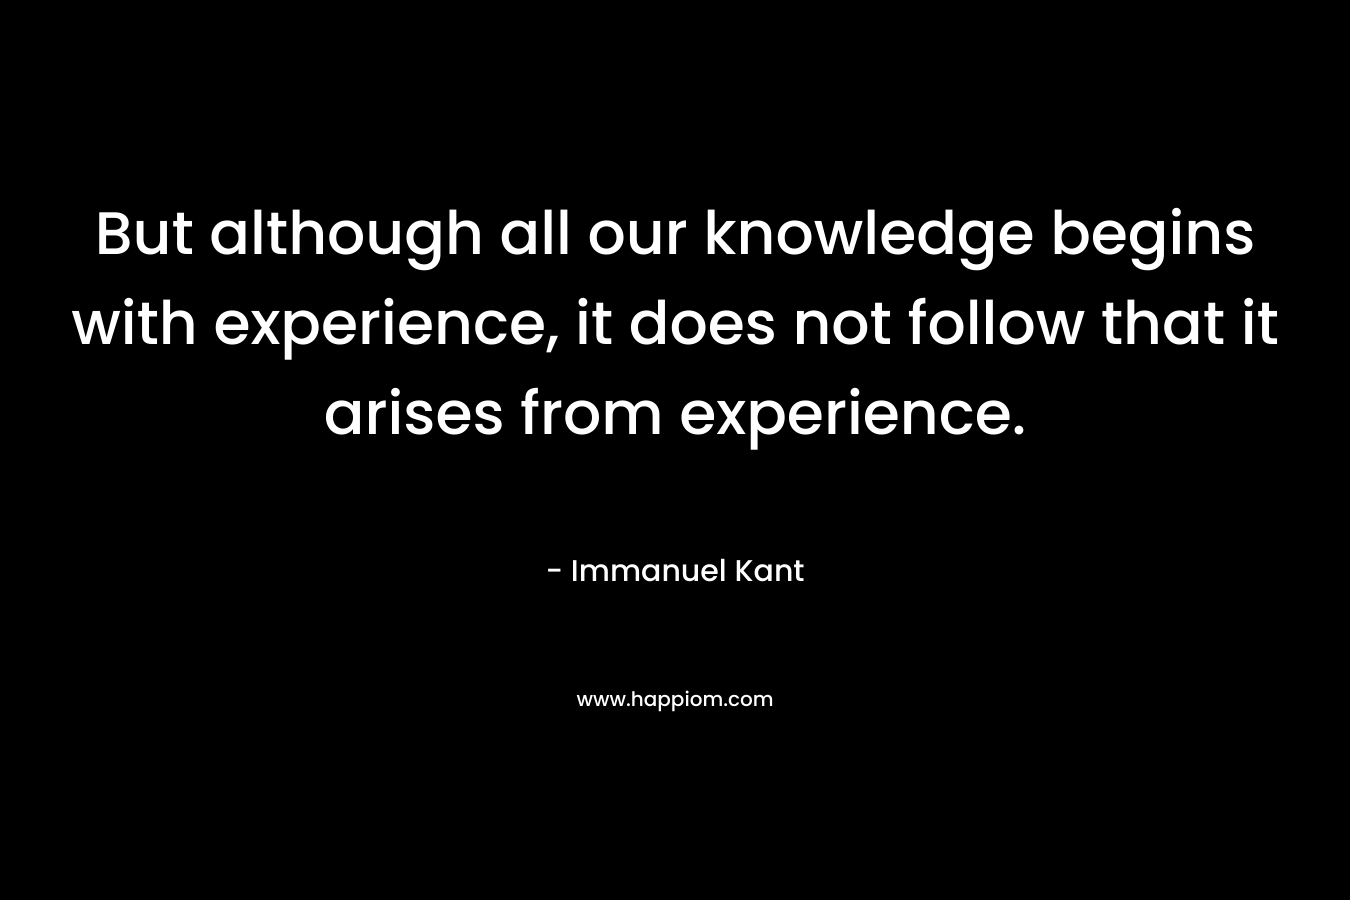 But although all our knowledge begins with experience, it does not follow that it arises from experience. – Immanuel Kant